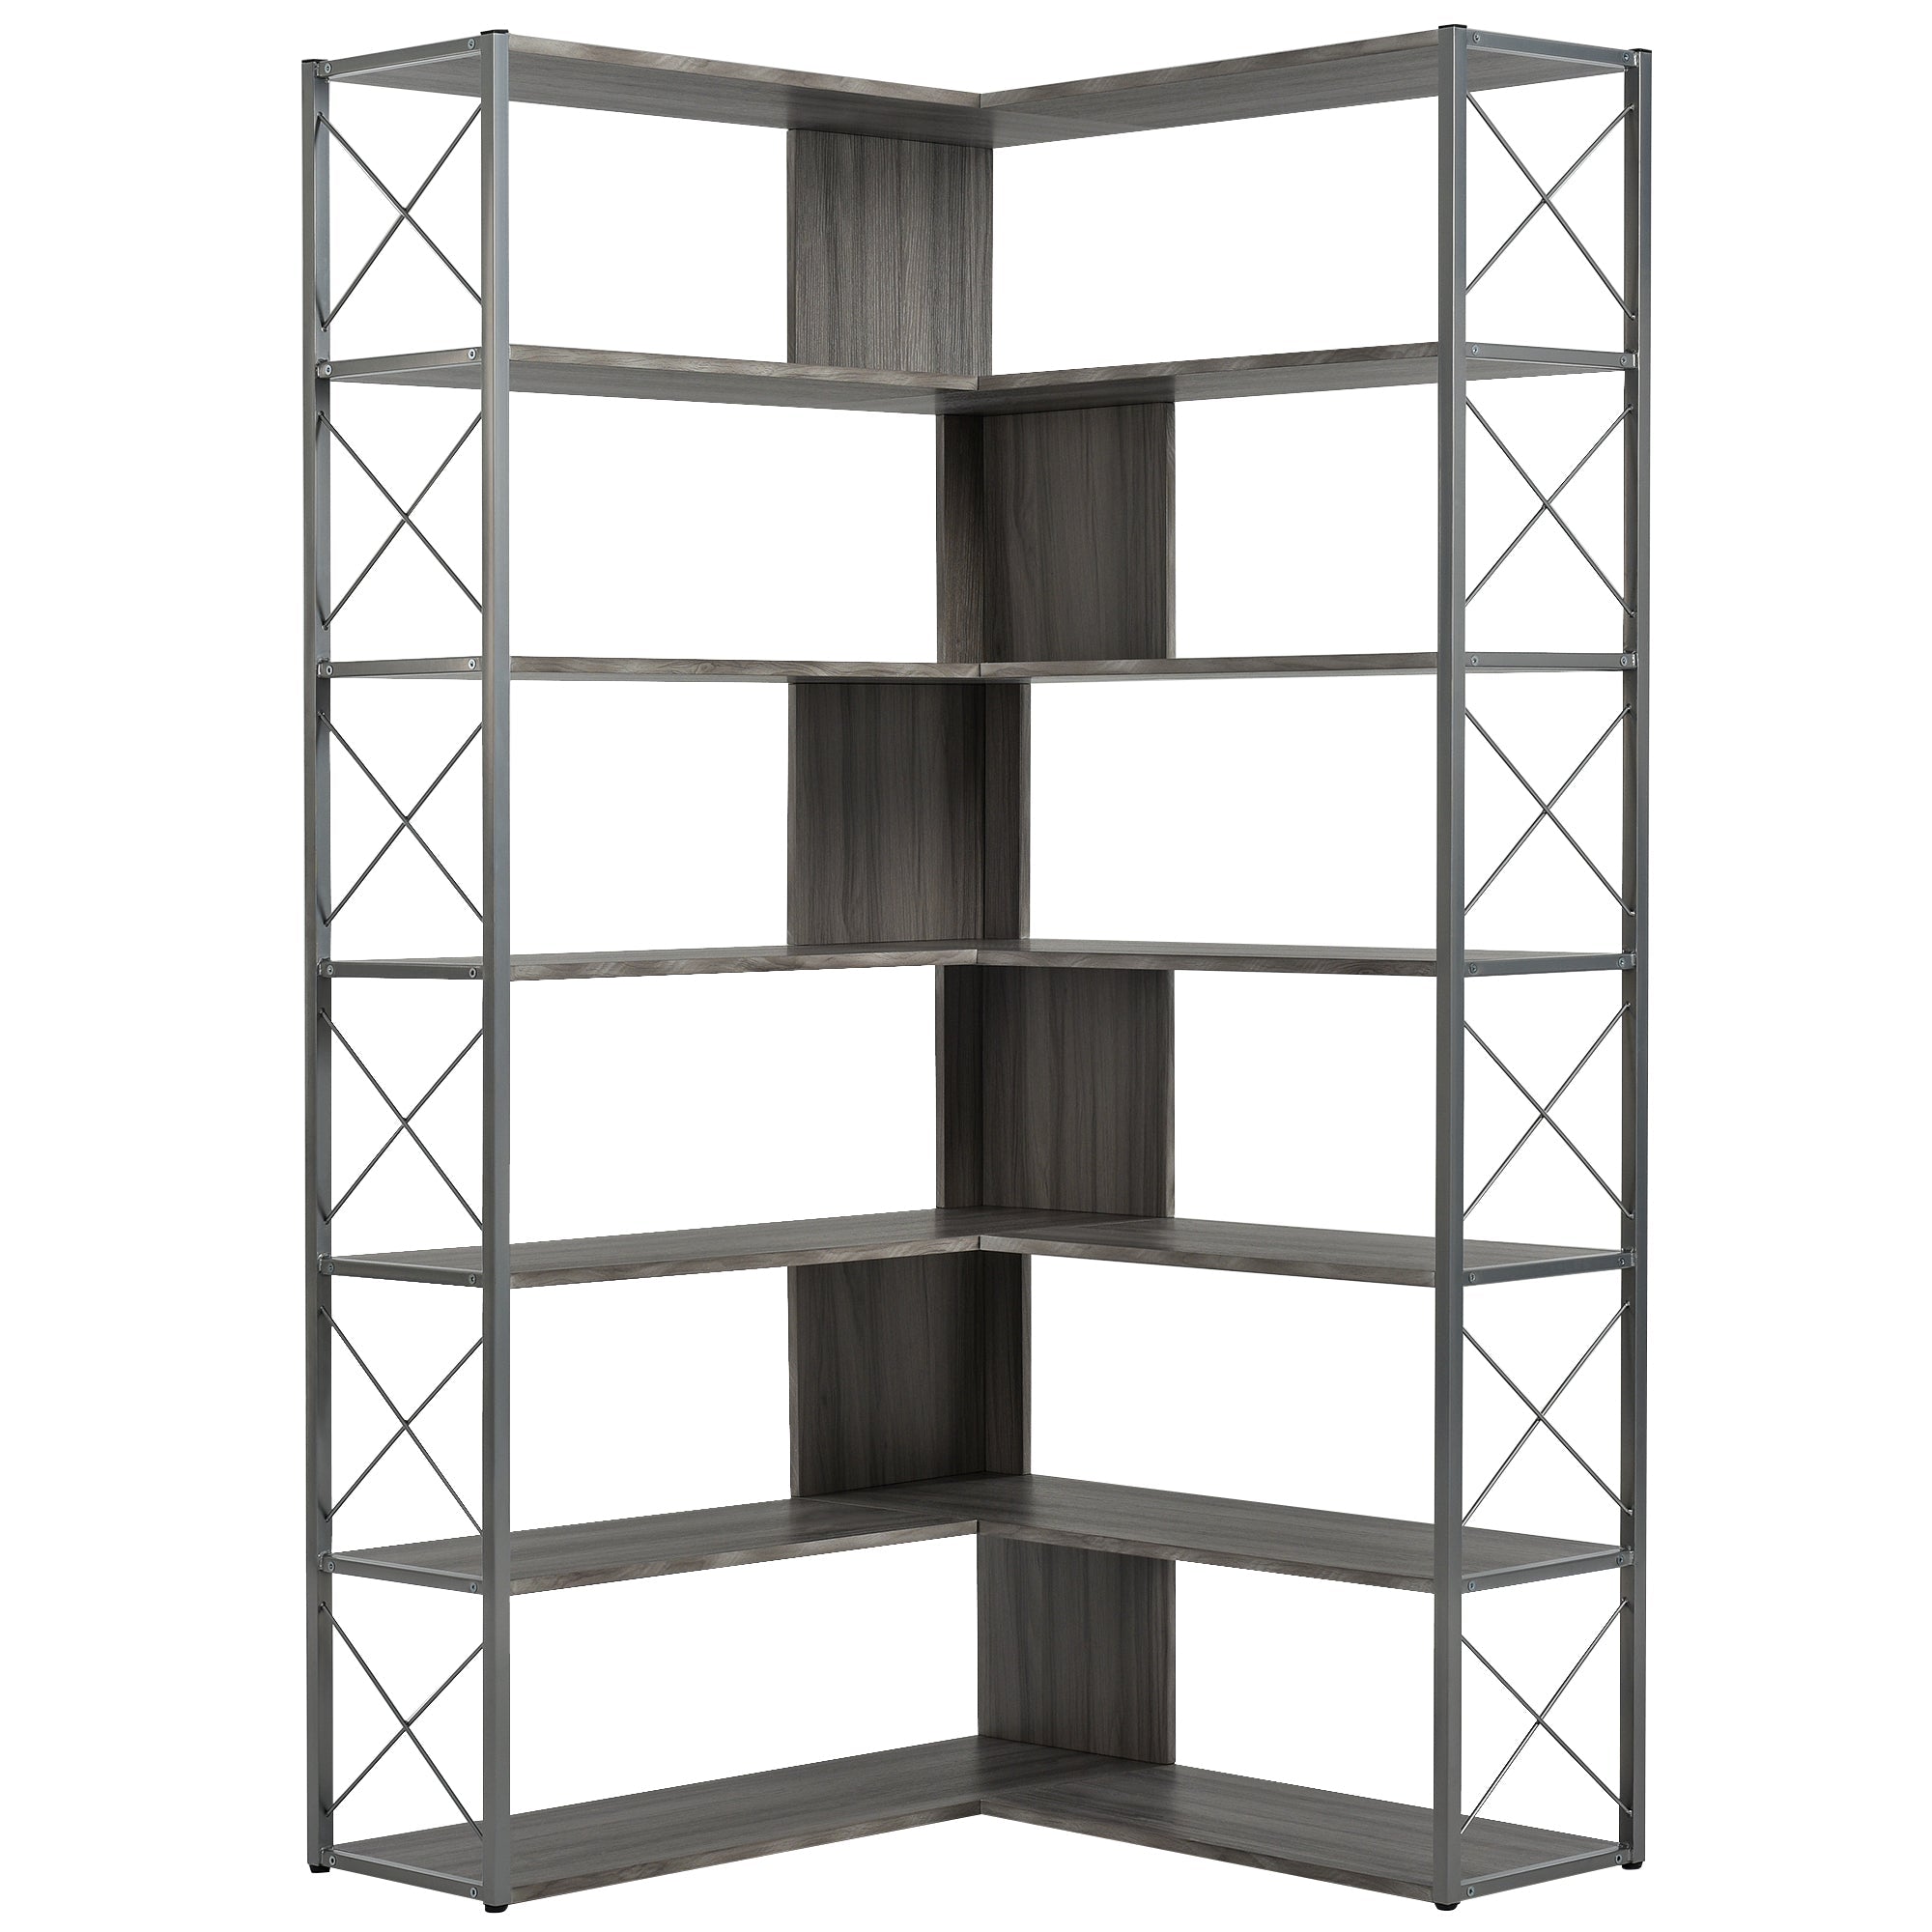 matilda 7 tier l shaped corner bookcase with metal frame industrial style shelf with open storagestorage cabinets 311756